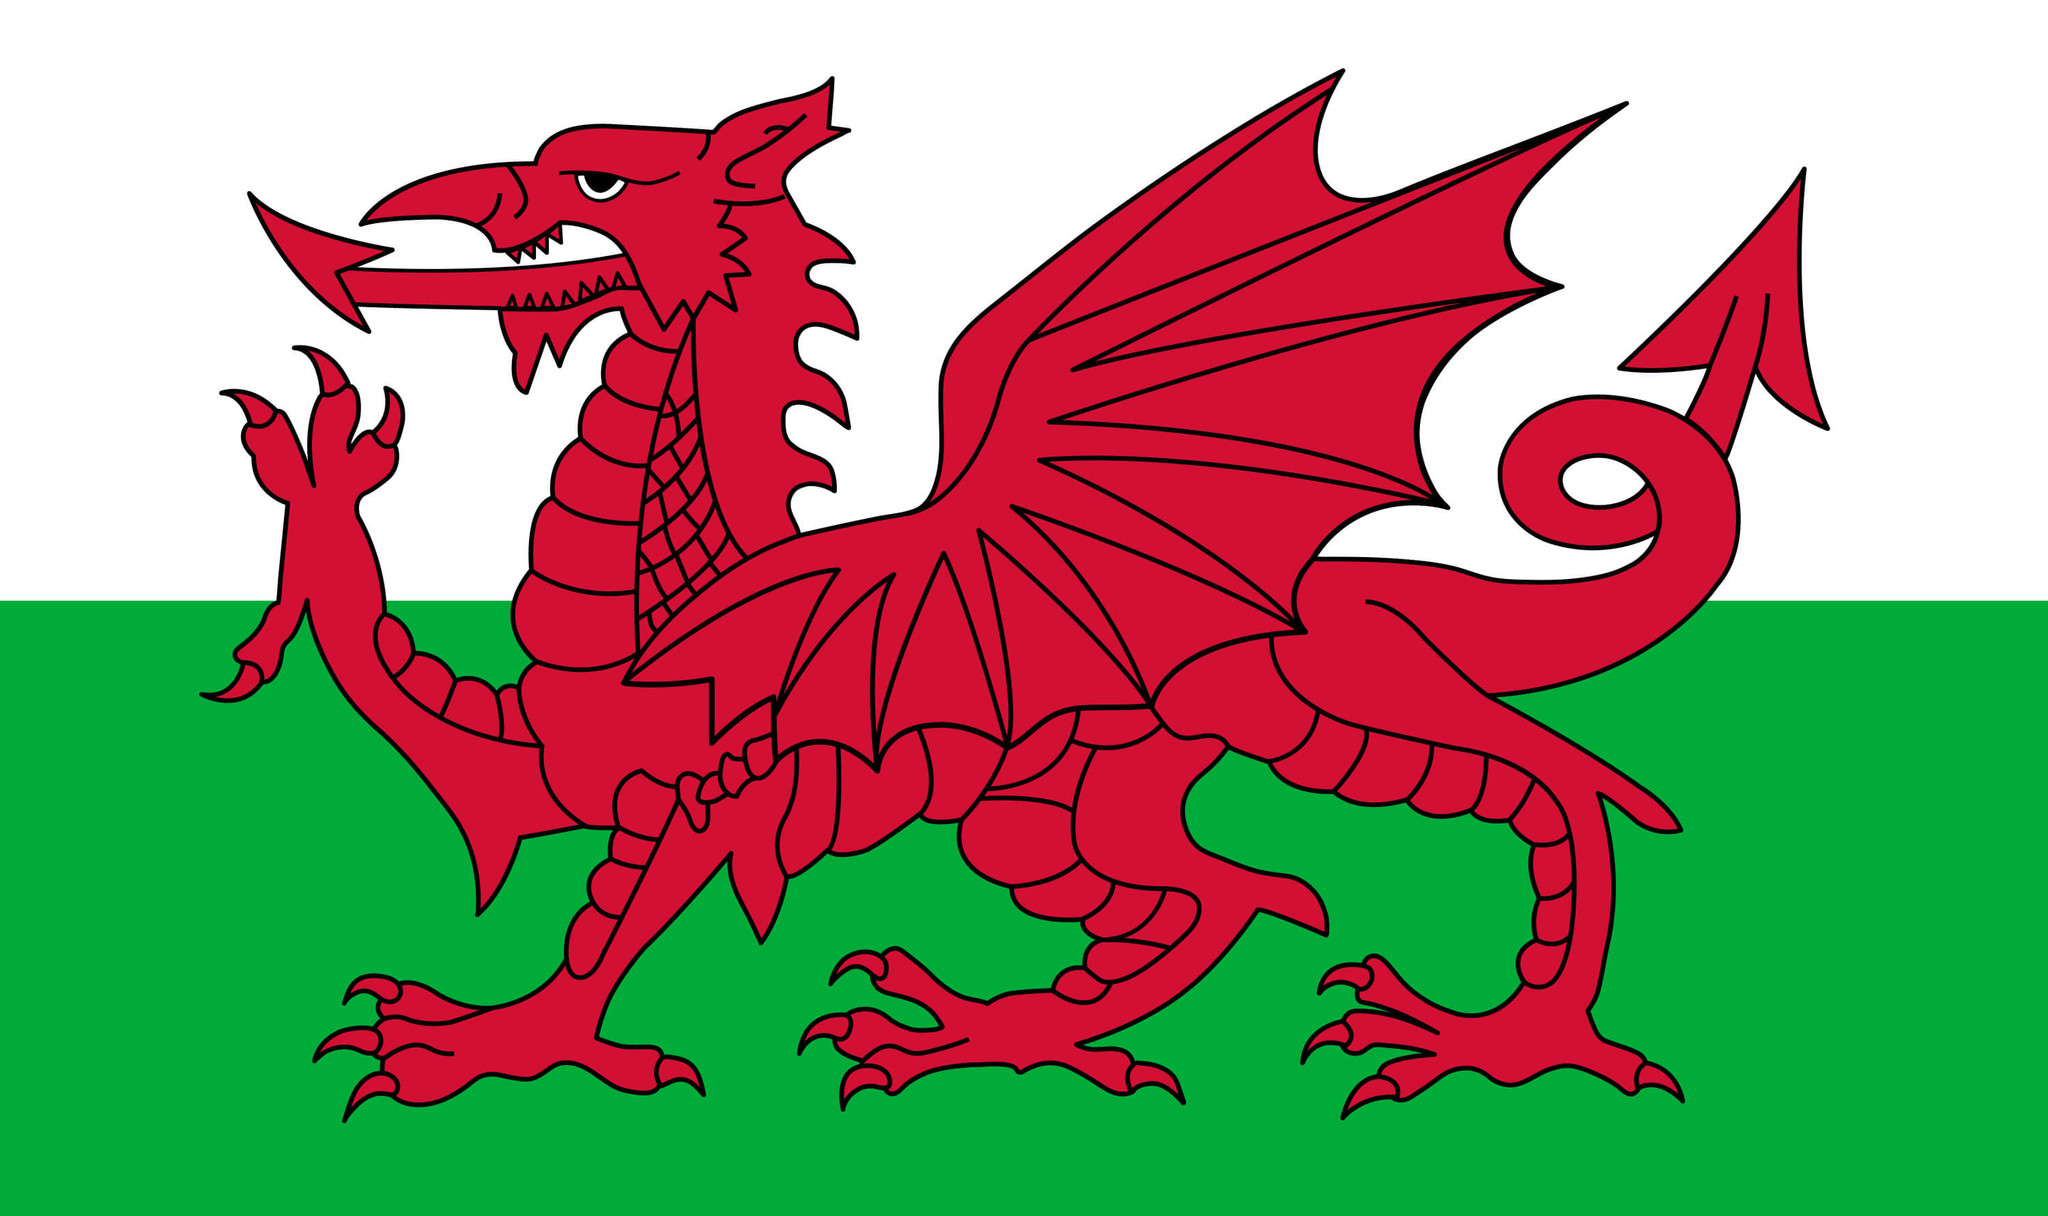 Wales flag package - Country flags